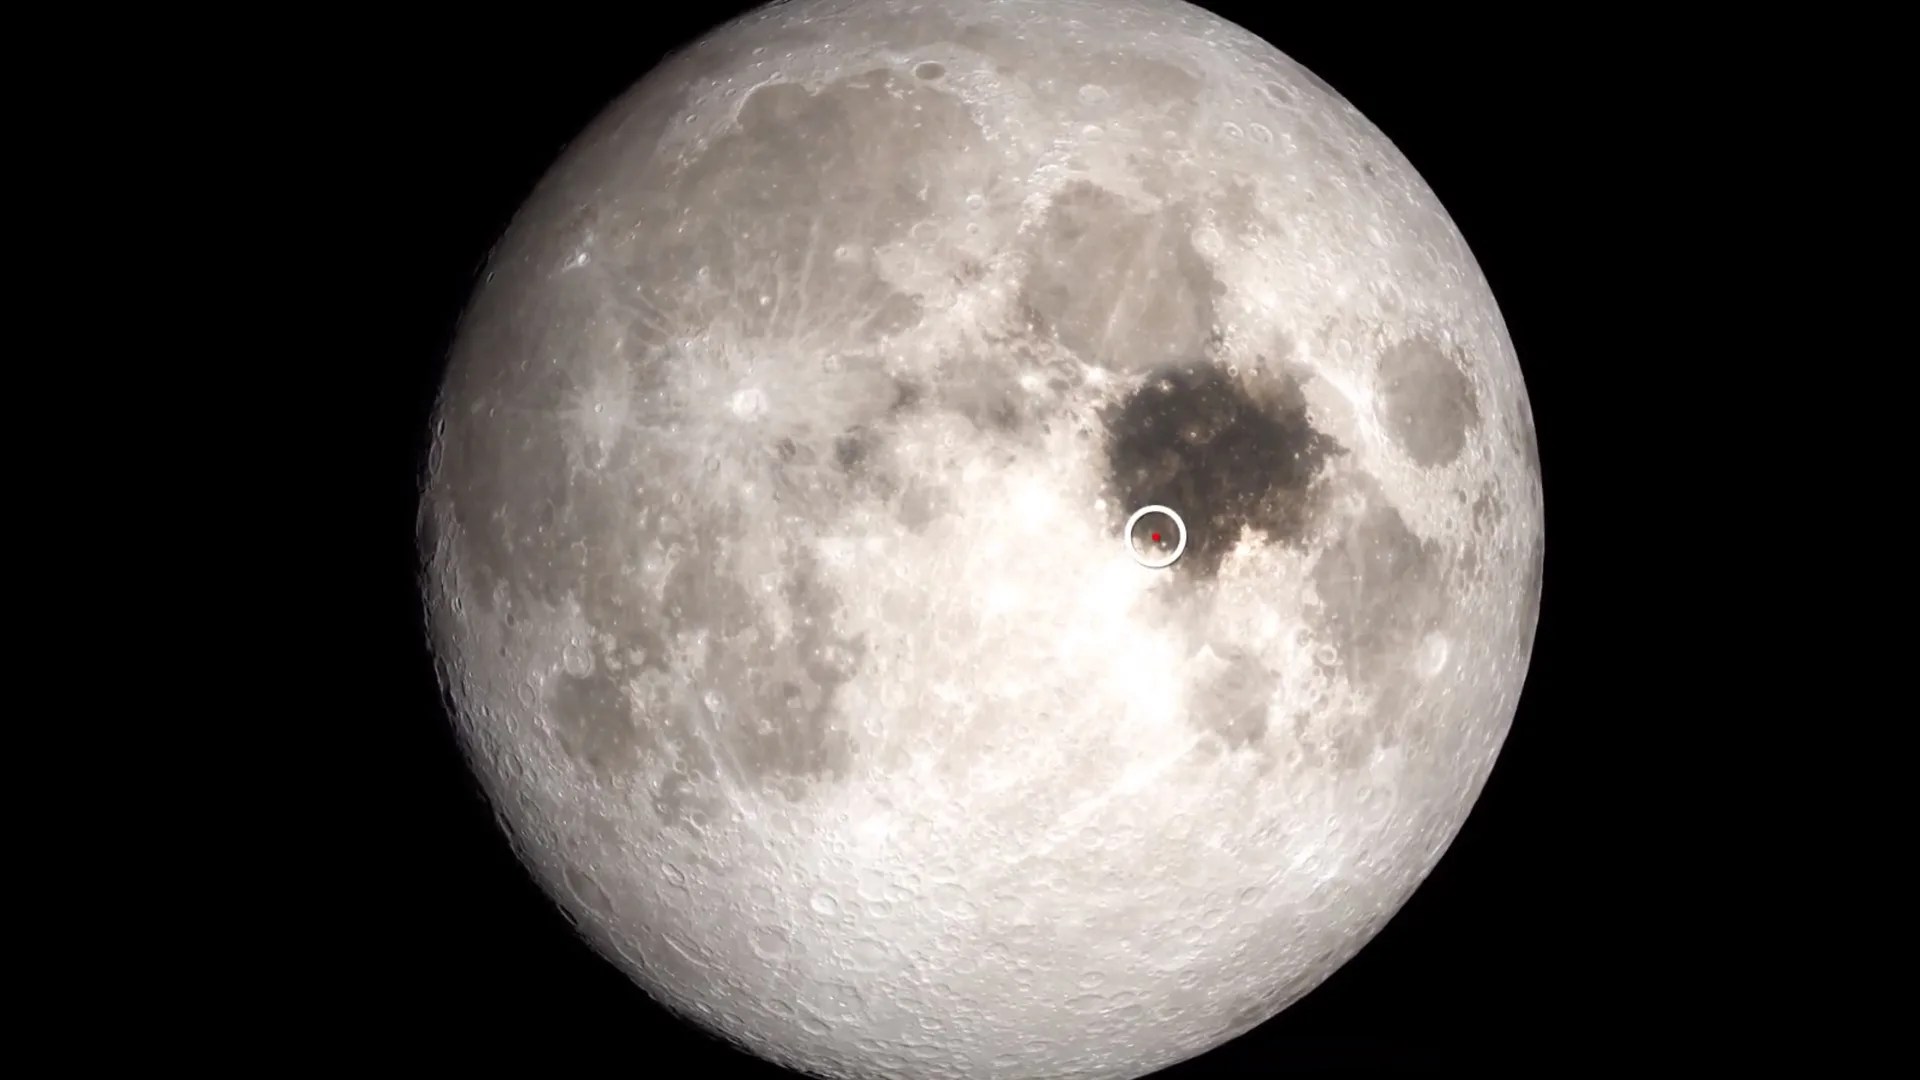 Picture of Moon with Sea of Tranquility and Apollo 11 landing site marked.